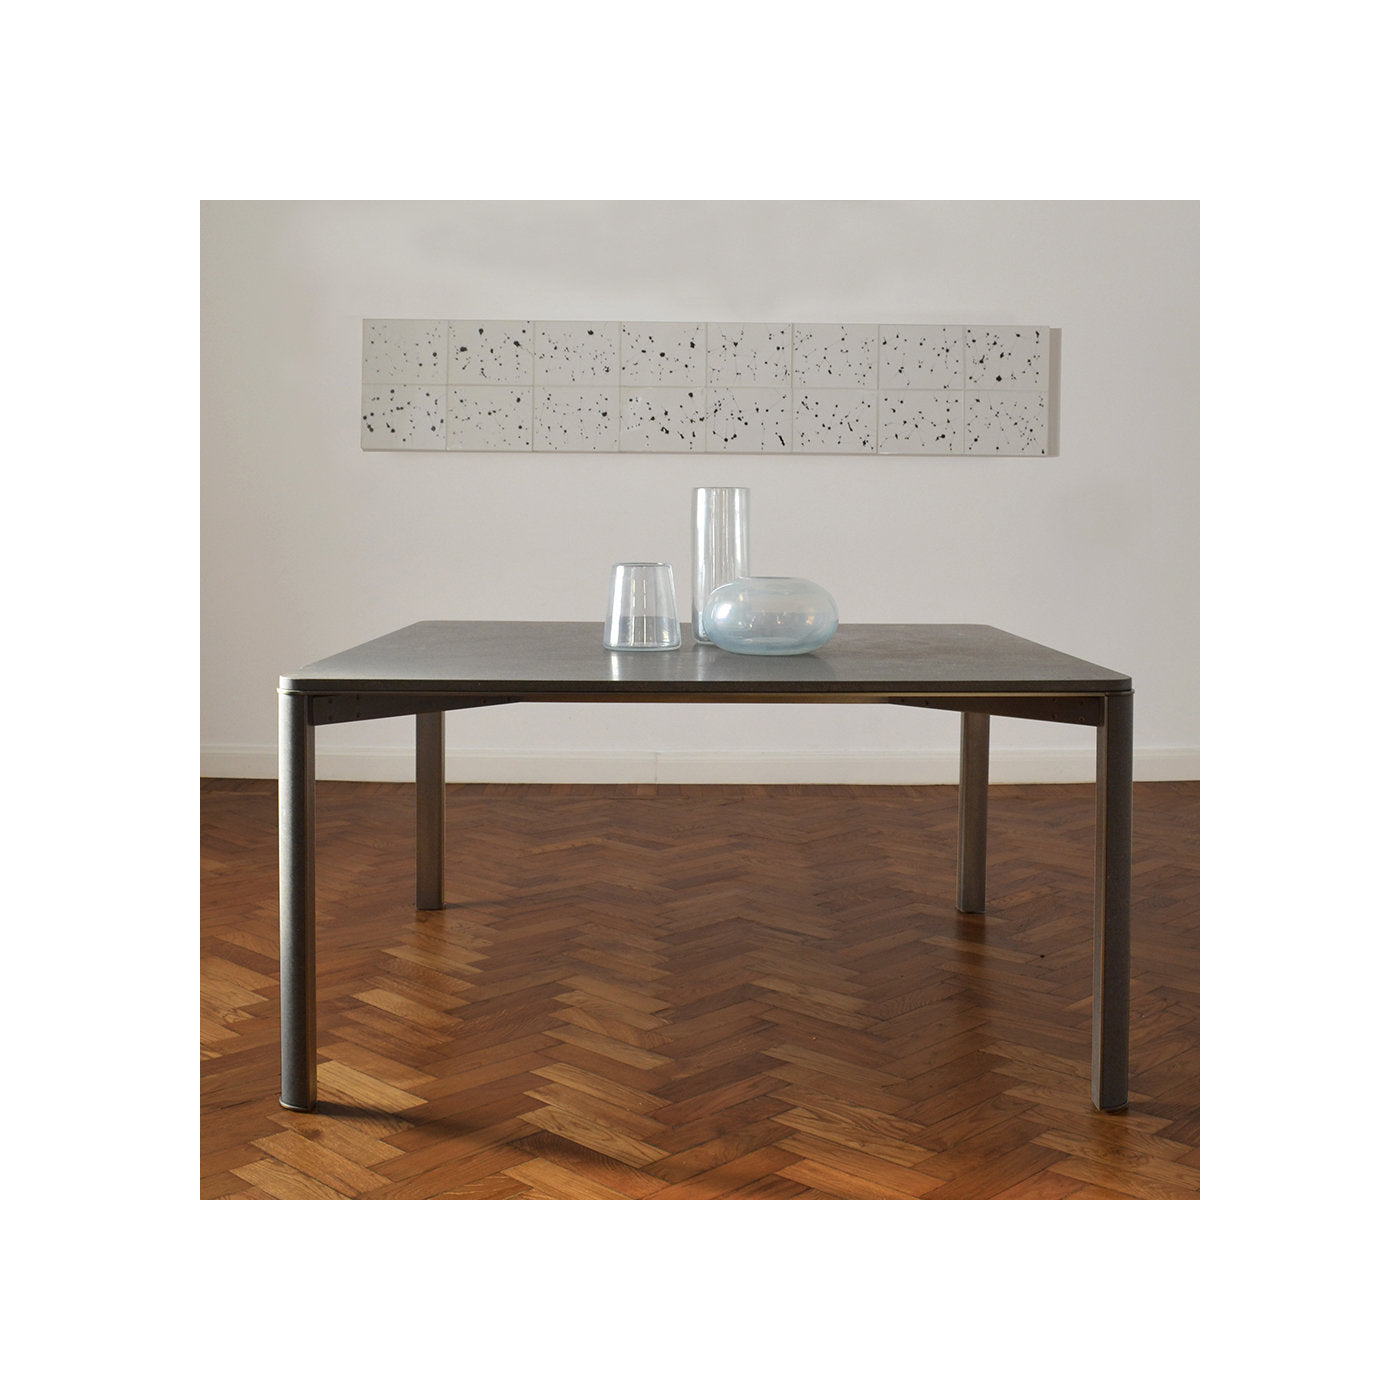 Gregorio Dining Table in Basaltina Marble - Alternative view 4